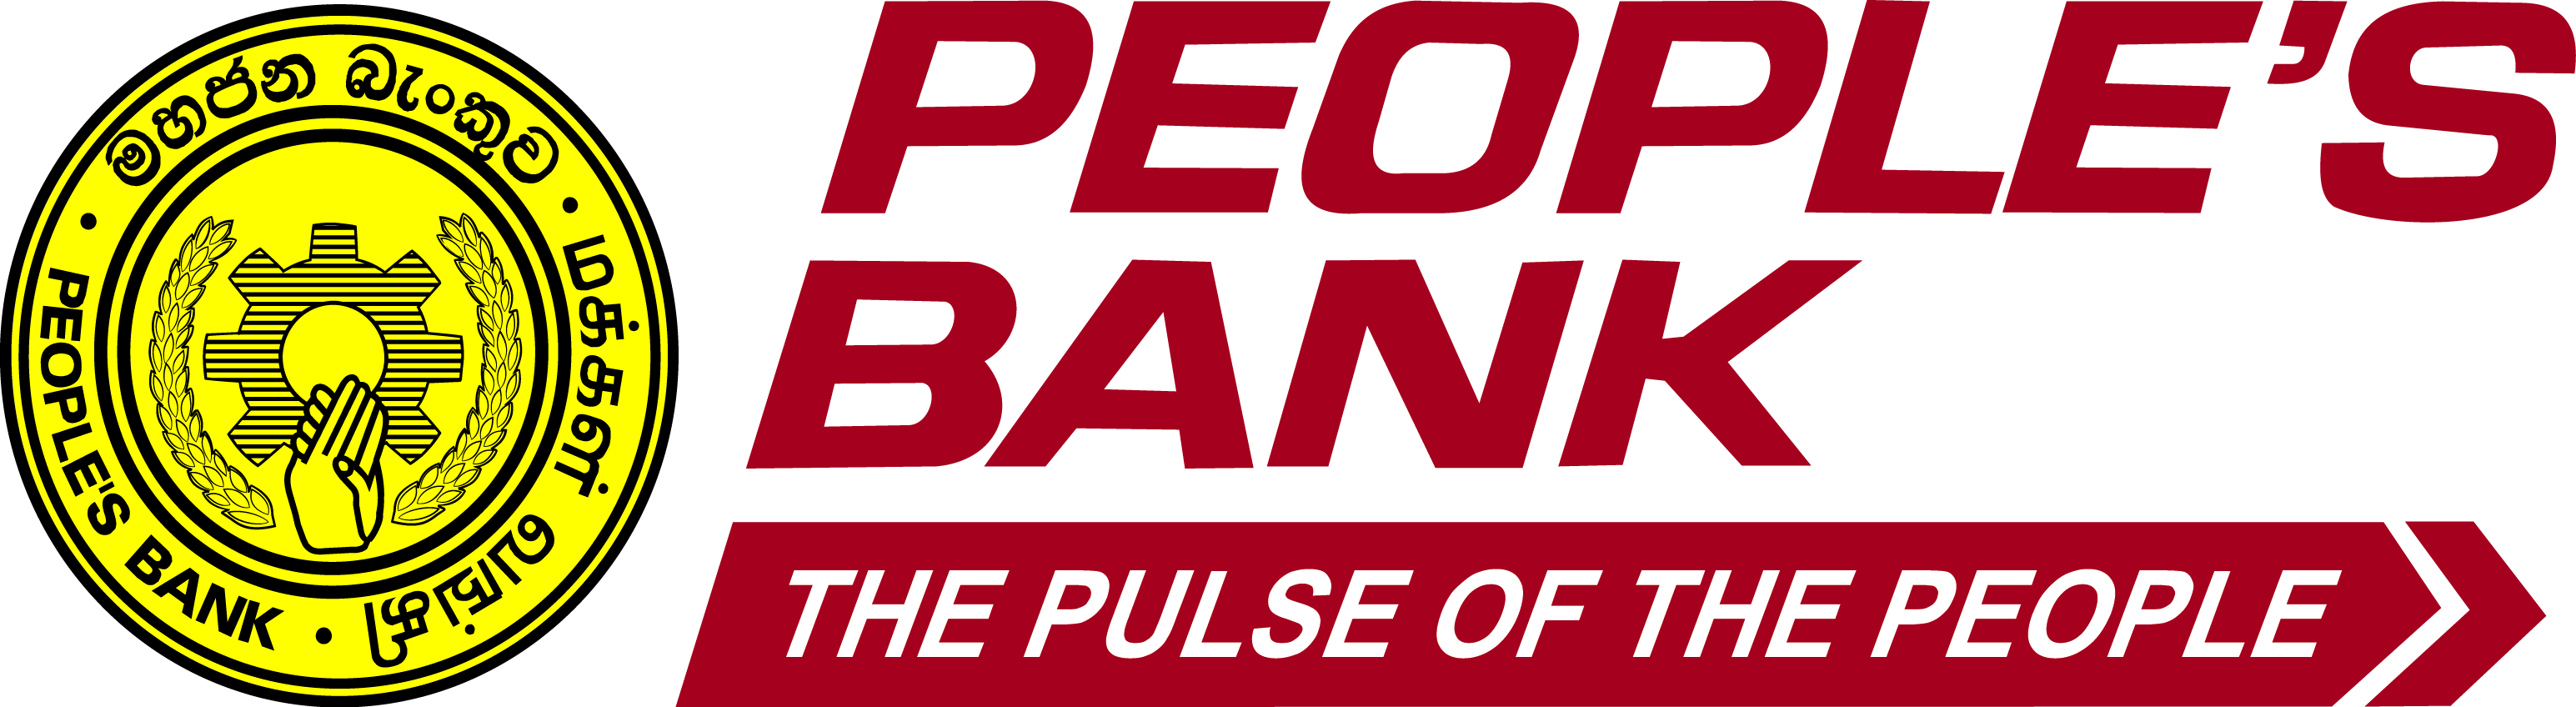 Peoples Bank Logo - PEOPLE'S BANK - INVEST.LK